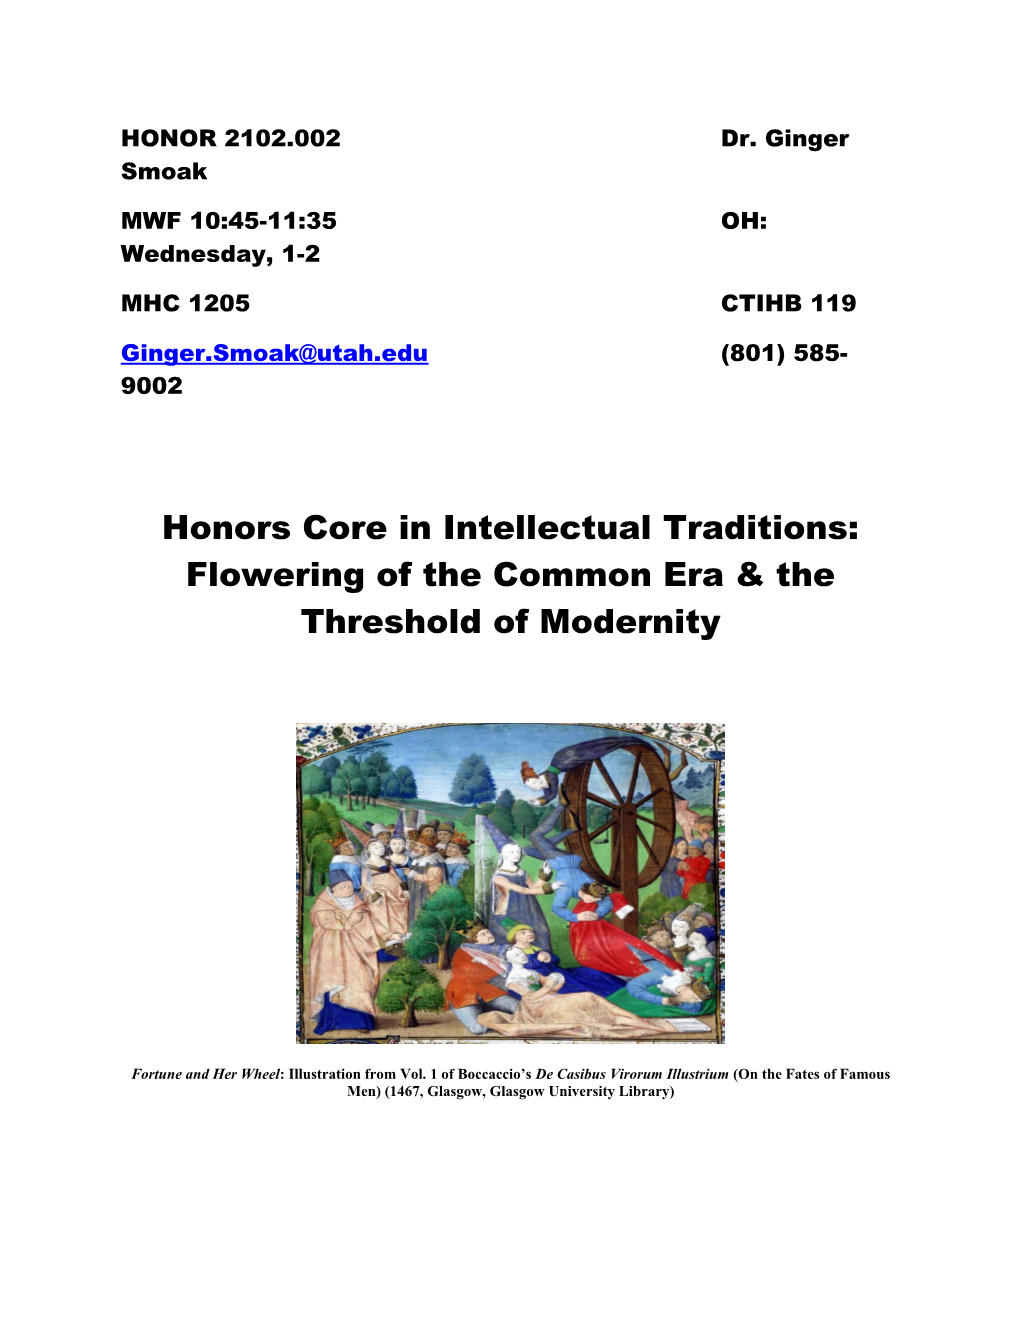 Honors Core in Intellectual Traditions: Flowering of the Common Era & the Threshold Of